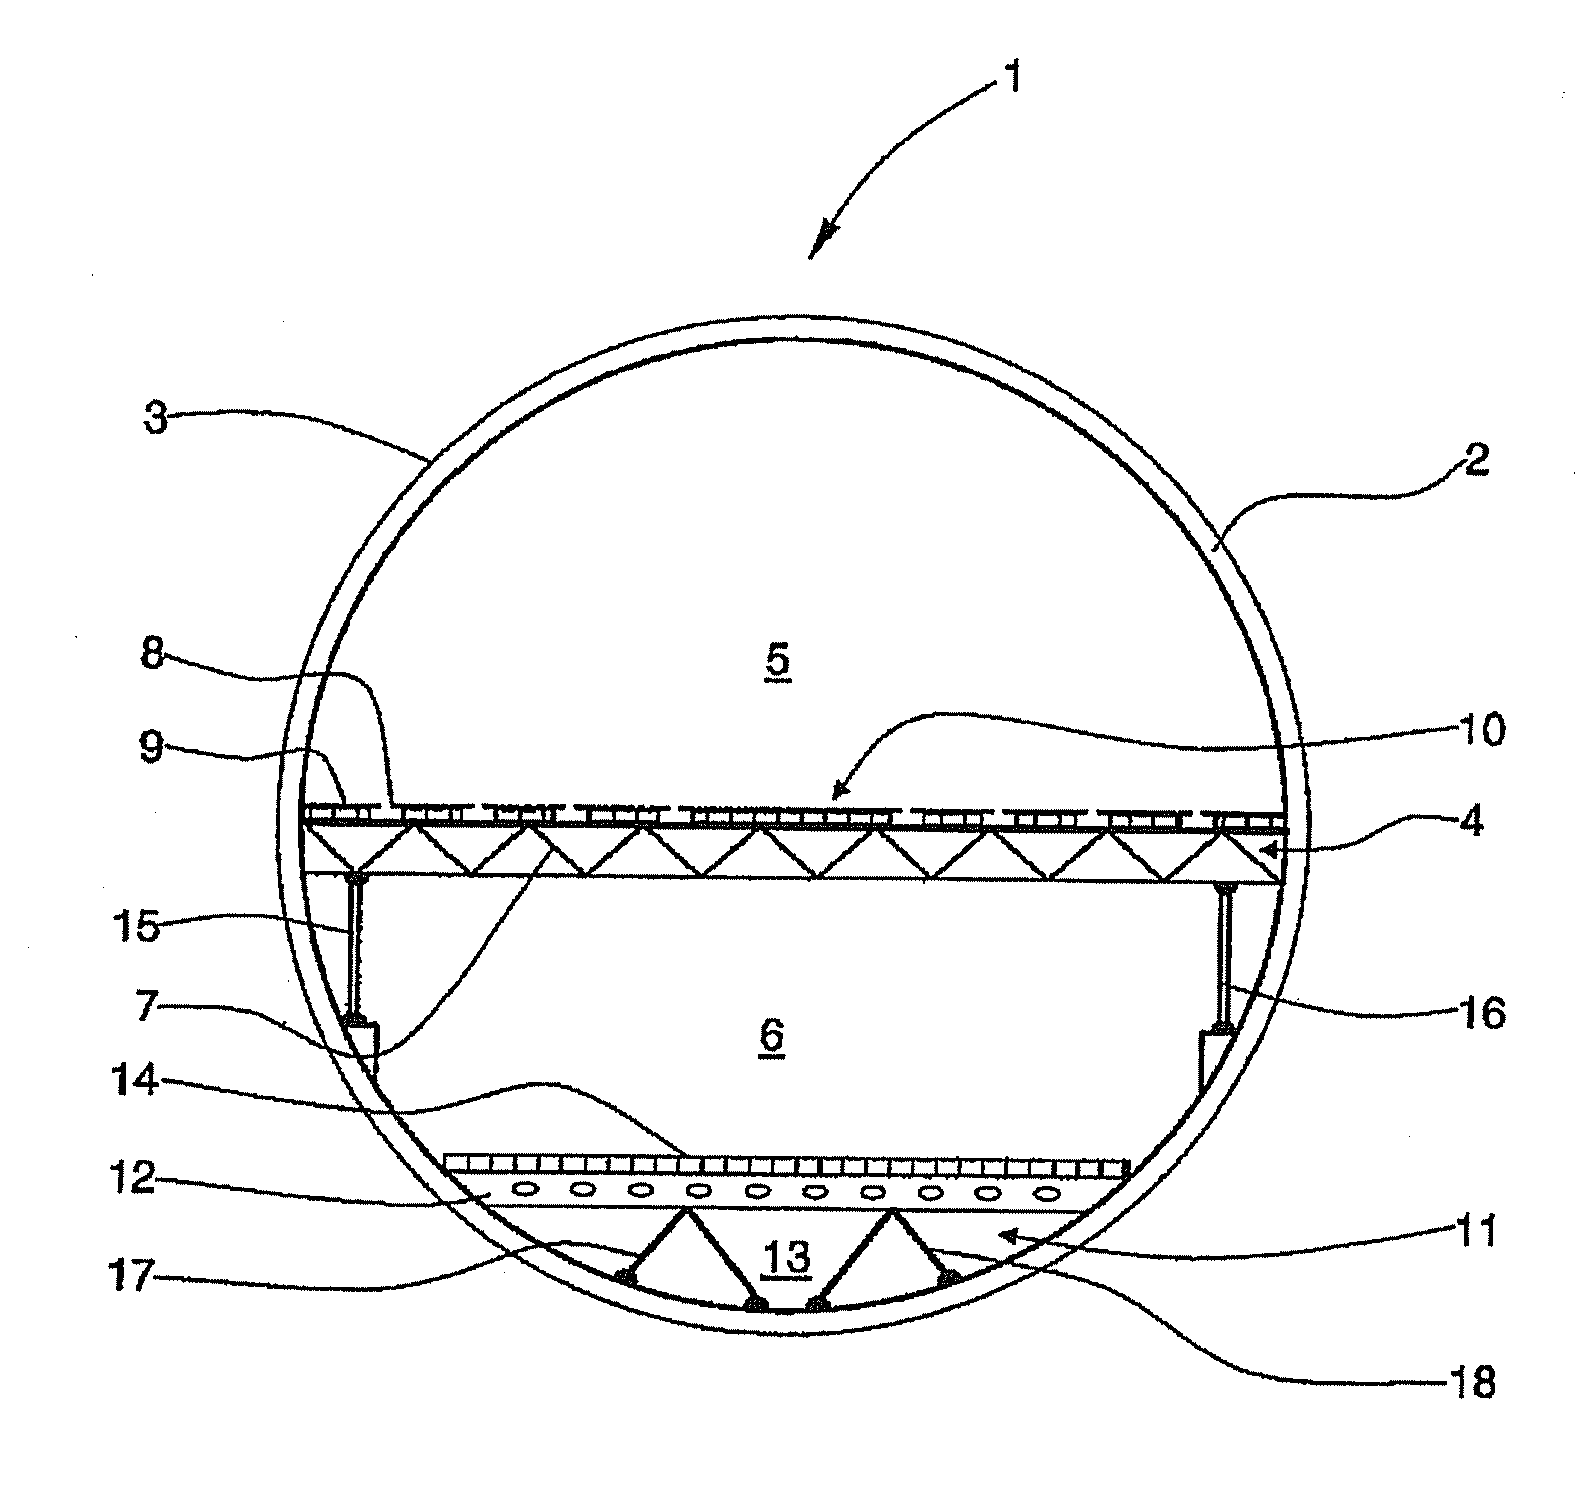 Rod for supporting components in a fuselage cell structure of an aircraft